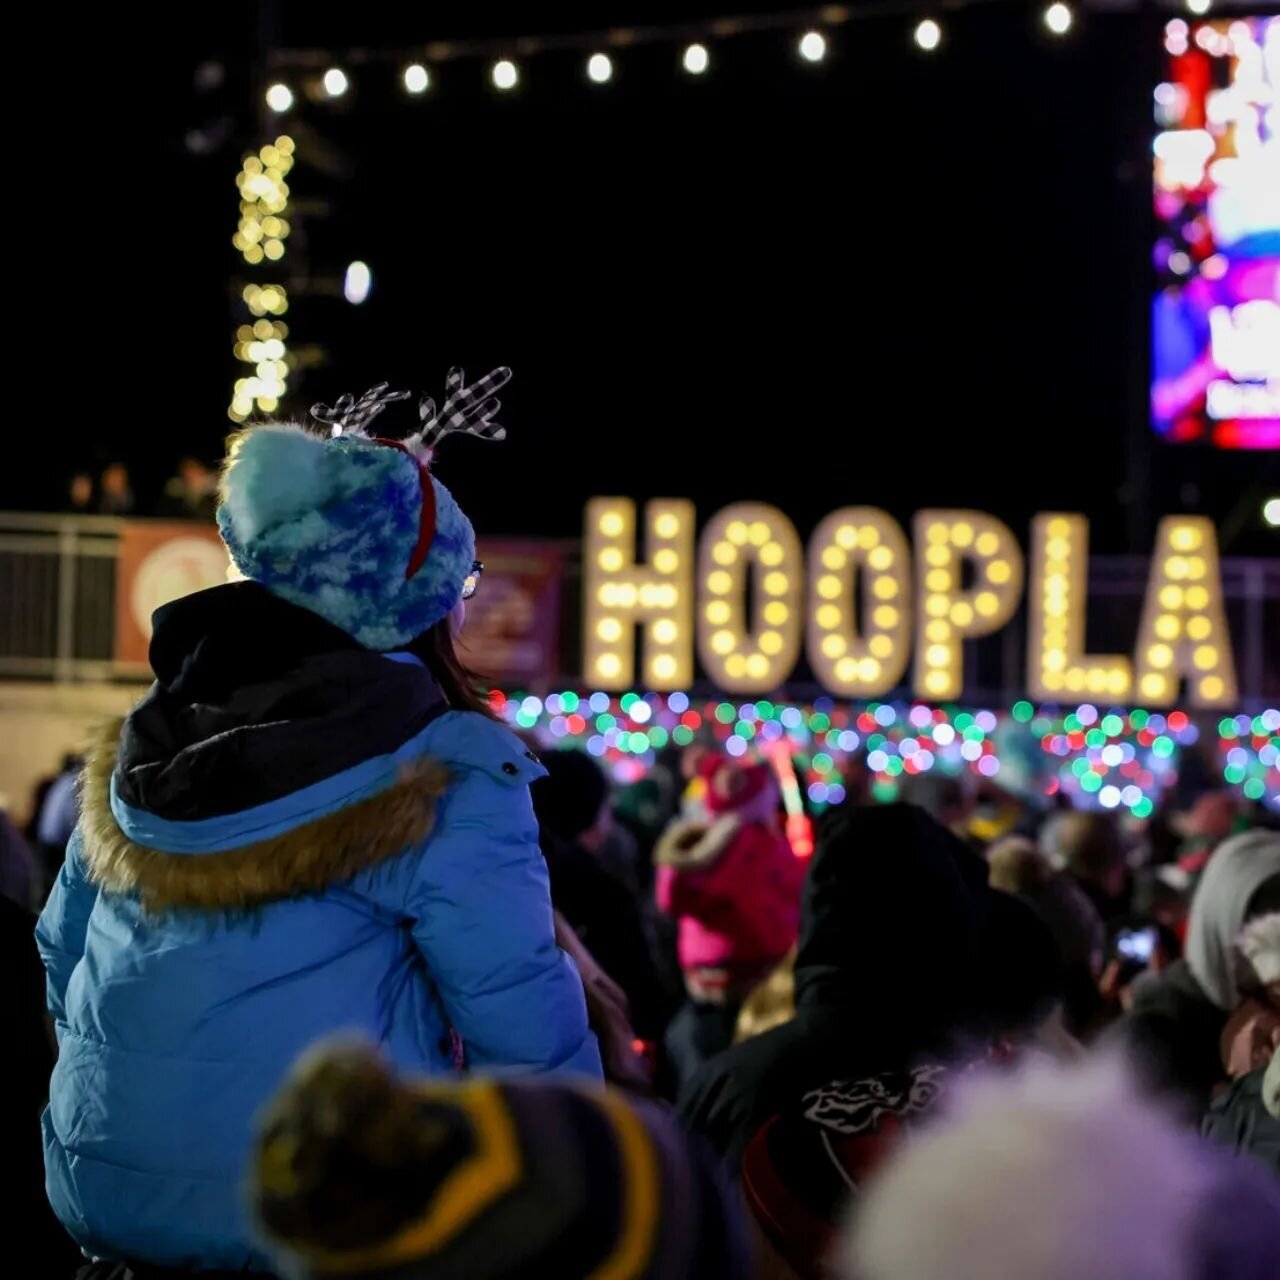 Cedar Falls goes all out for Christmas and I love it!

It was a chilly 25&deg; but well worth it. 

#christmas #holiday #hoopla #cedarfalls #iowa #winter #cold #snow #holidayhoopla